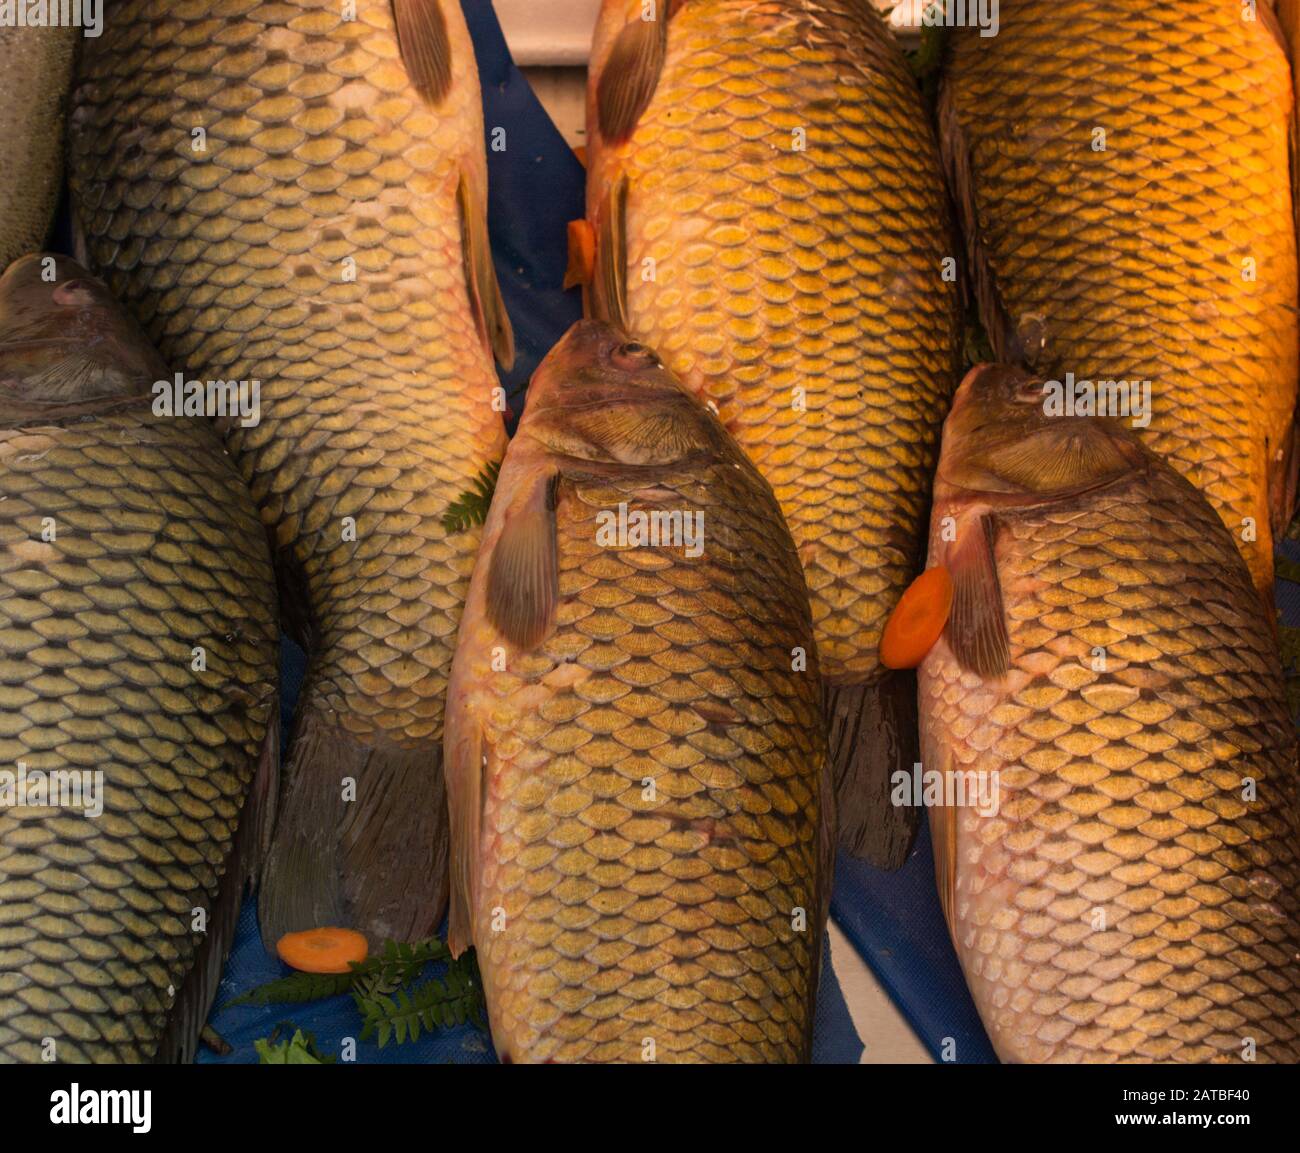 Fresh fish as sea food for sale at a fish market Stock Photo